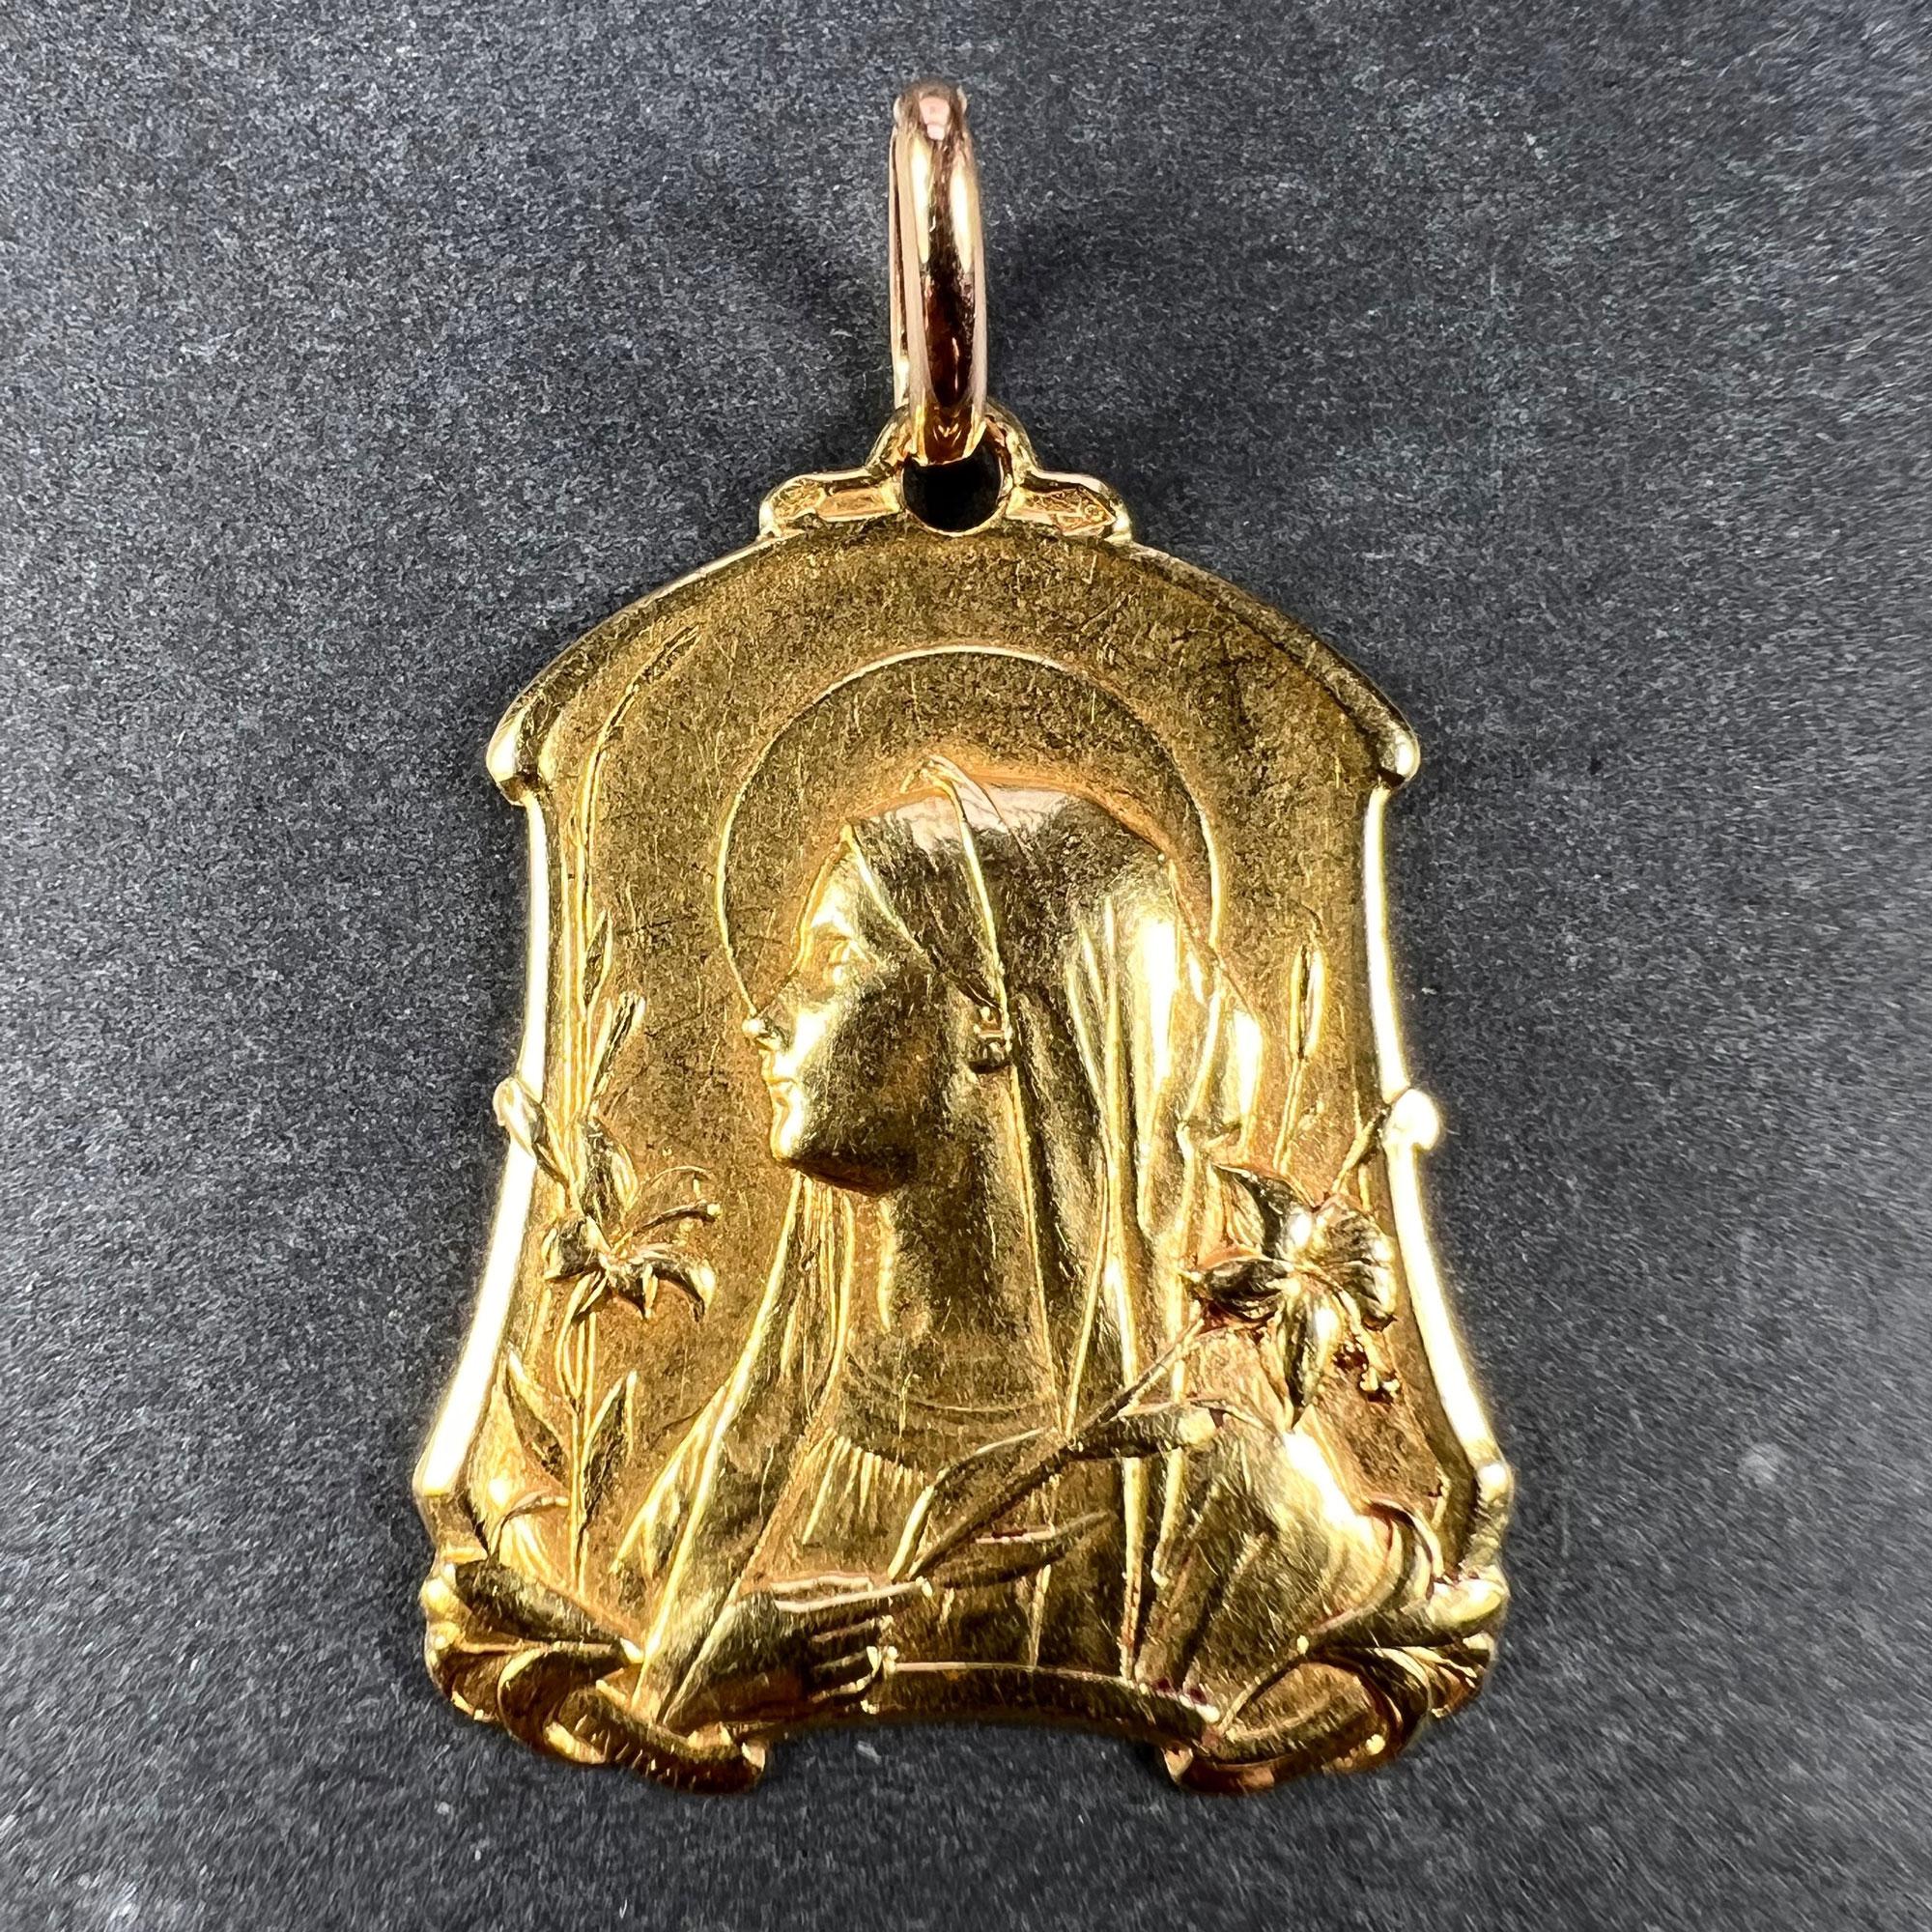 An 18 karat (18K) yellow gold pendant designed as a shield-shaped medal depicting the Virgin Mary surrounded by lilies. Signed Tairai. The reverse depicts a field of lilies above the monogram MD, with the date '24 Juin 56'. Stamped with the eagle’s